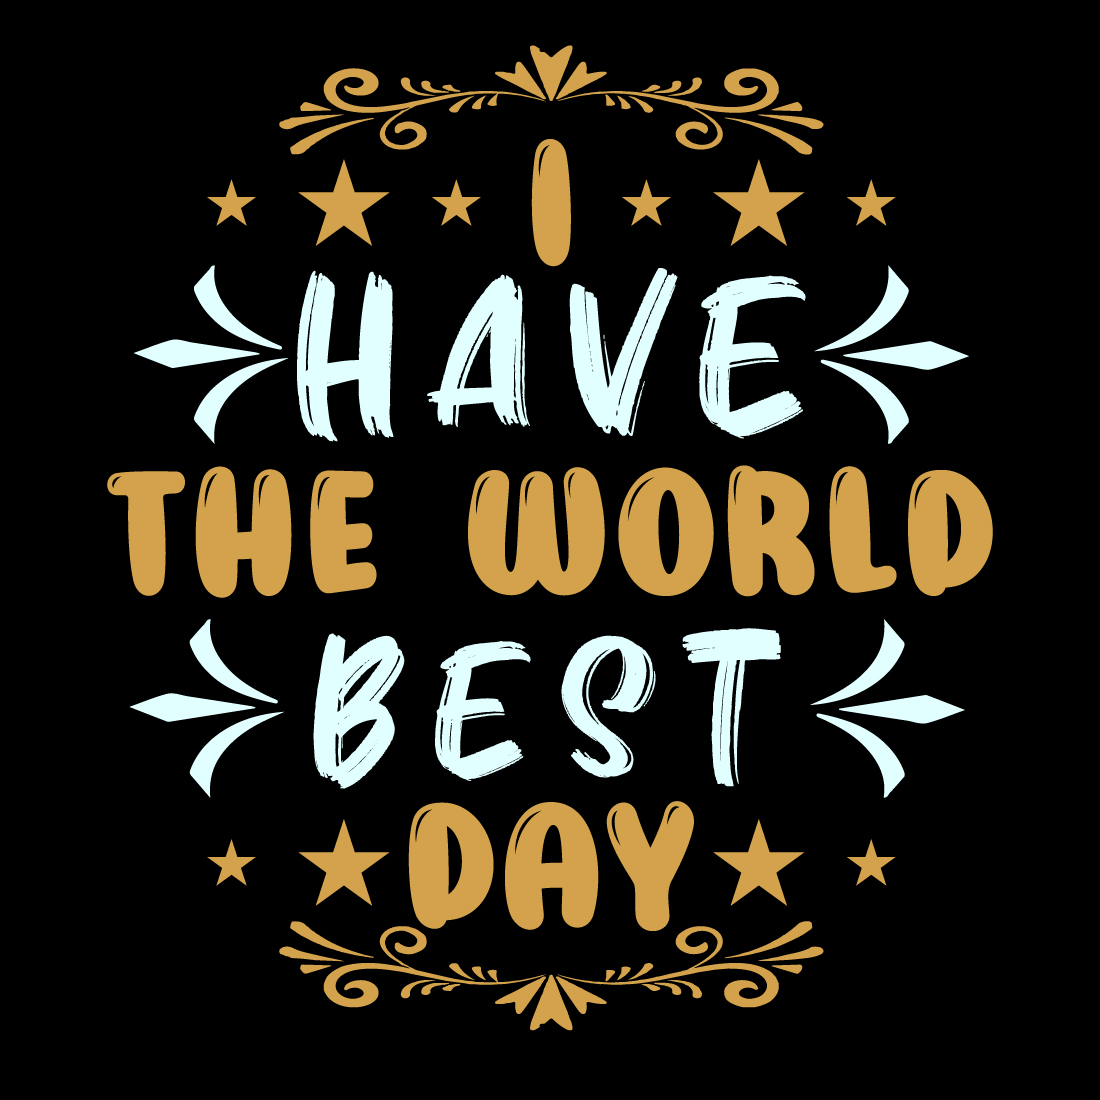 The world best day t shirt preview image.